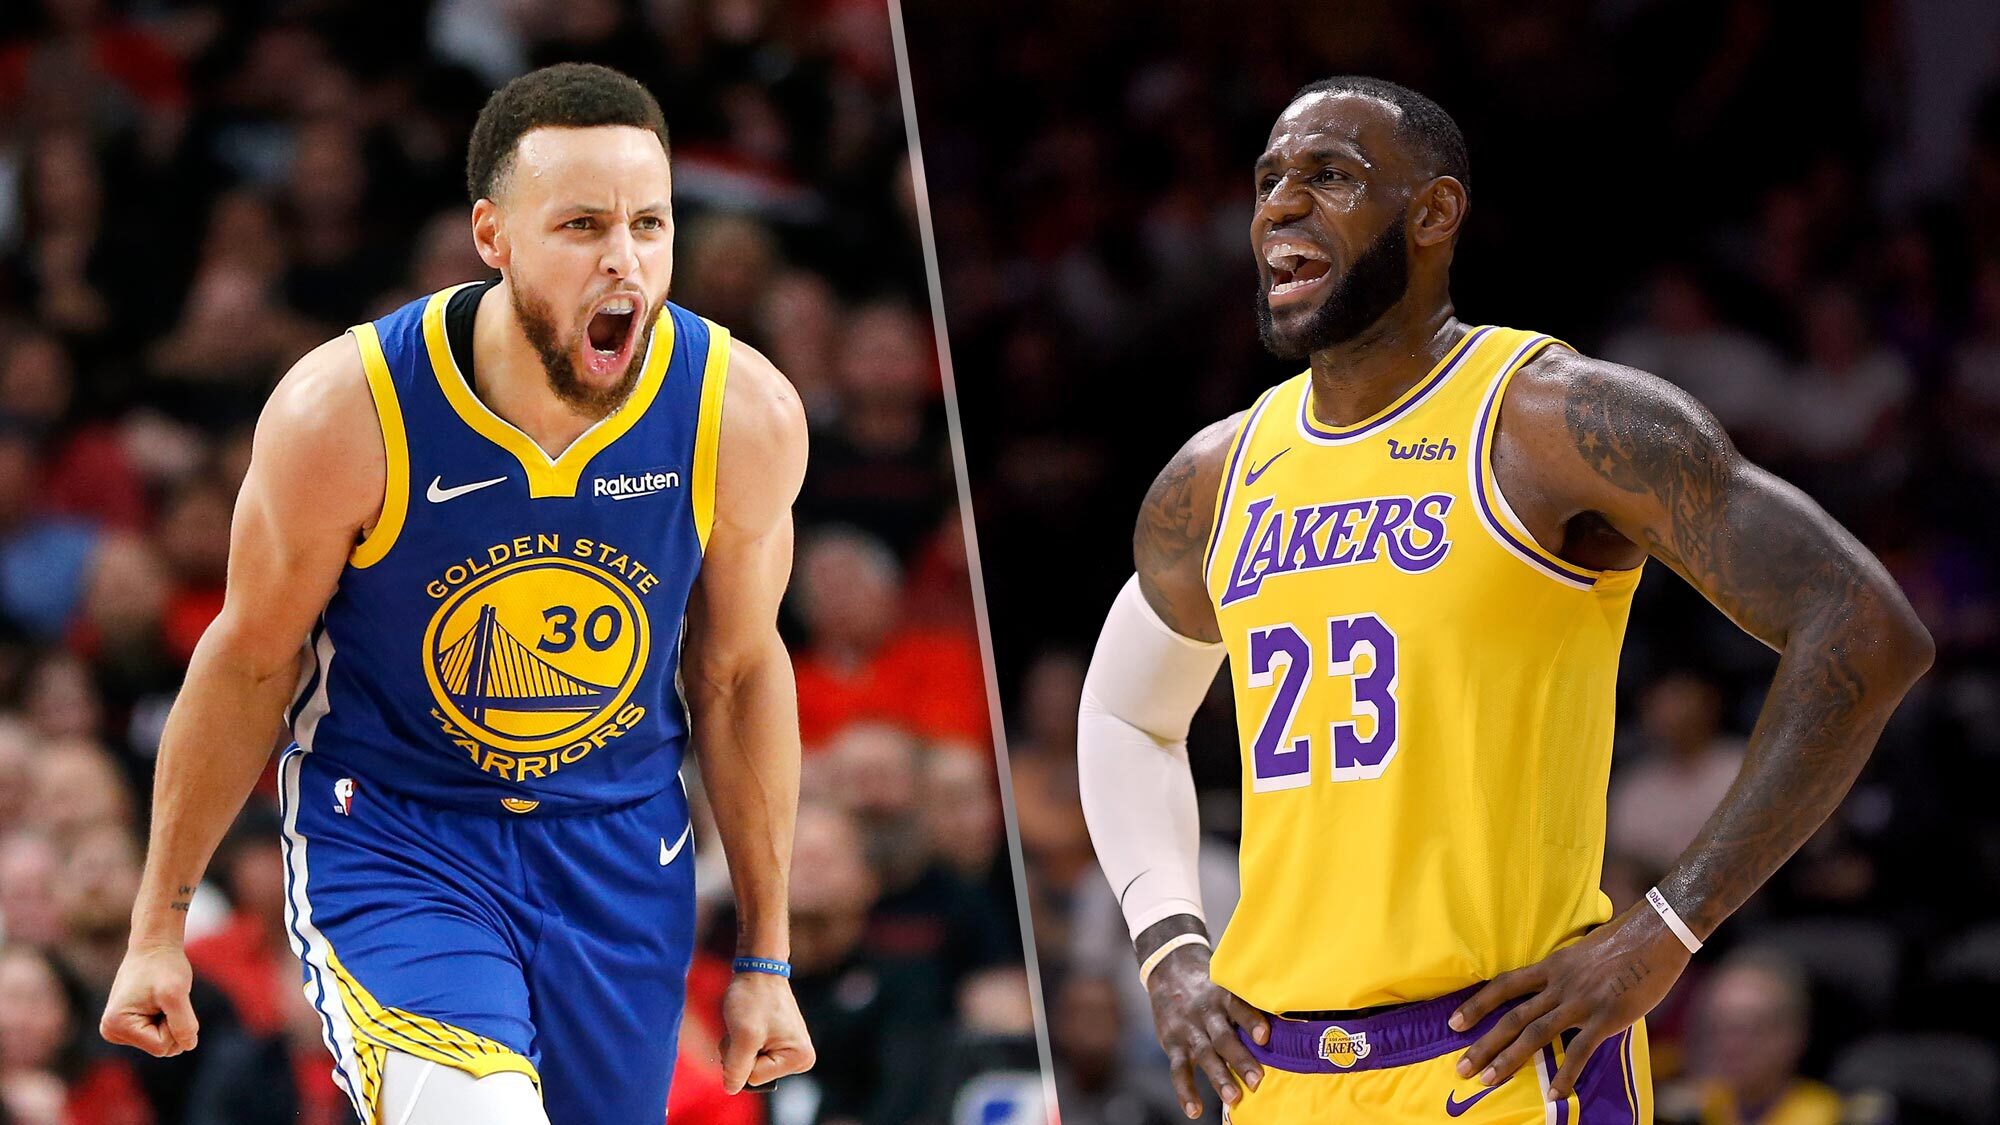 Warriors Vs Lakers Live Stream How To Watch The Nba Playoffs Online Tom S Guide